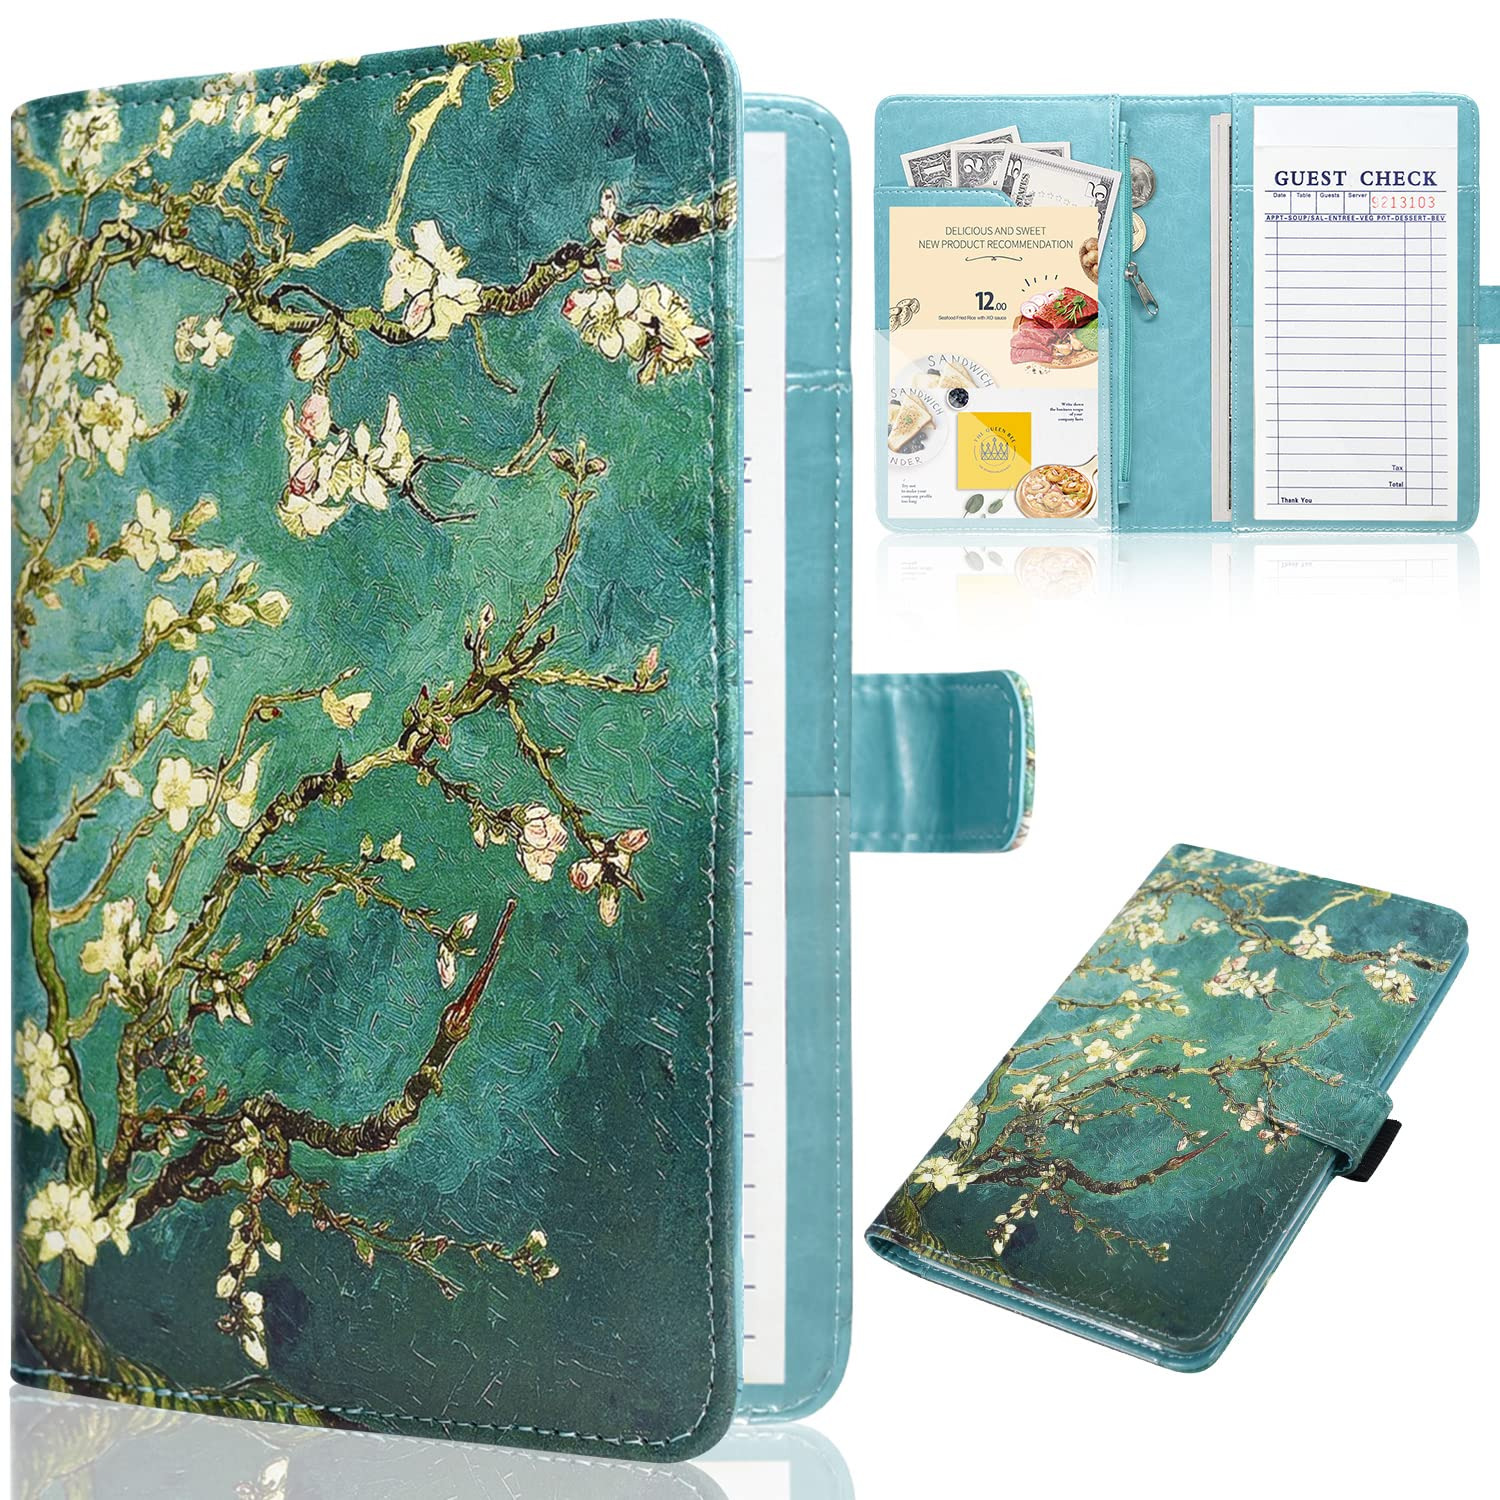 Leather Waitress Book Organizer - Server Wallet with Zipper (Almond Blossom)